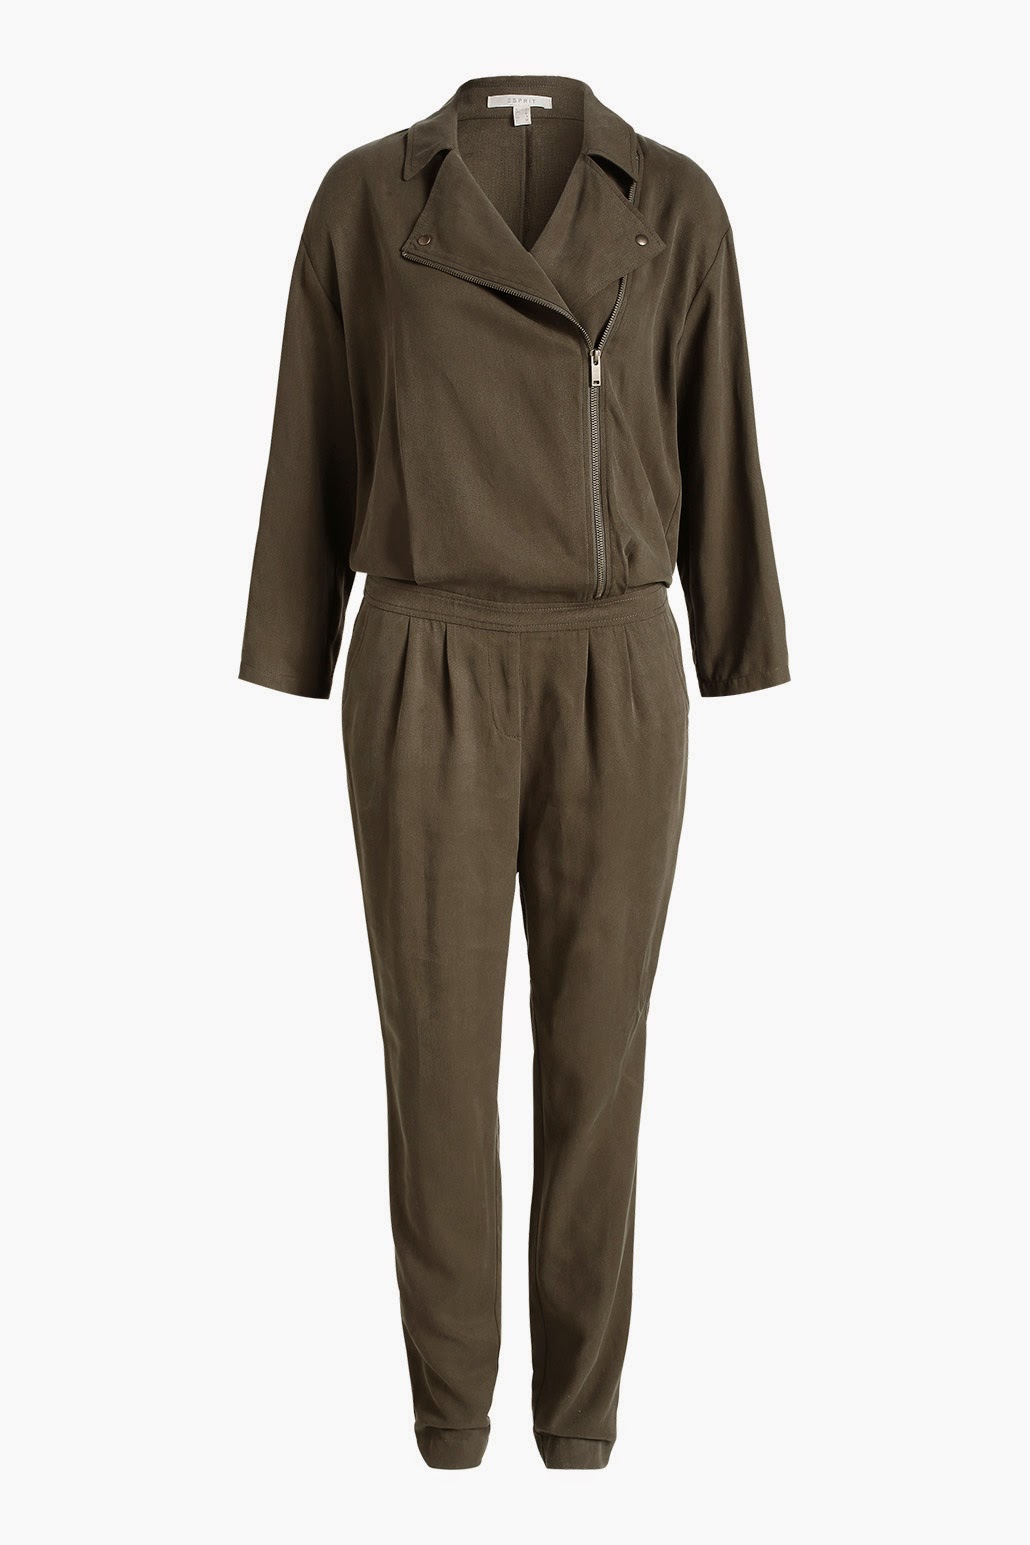 Lust of the week: Esprit military jumpsuit | Style Trunk